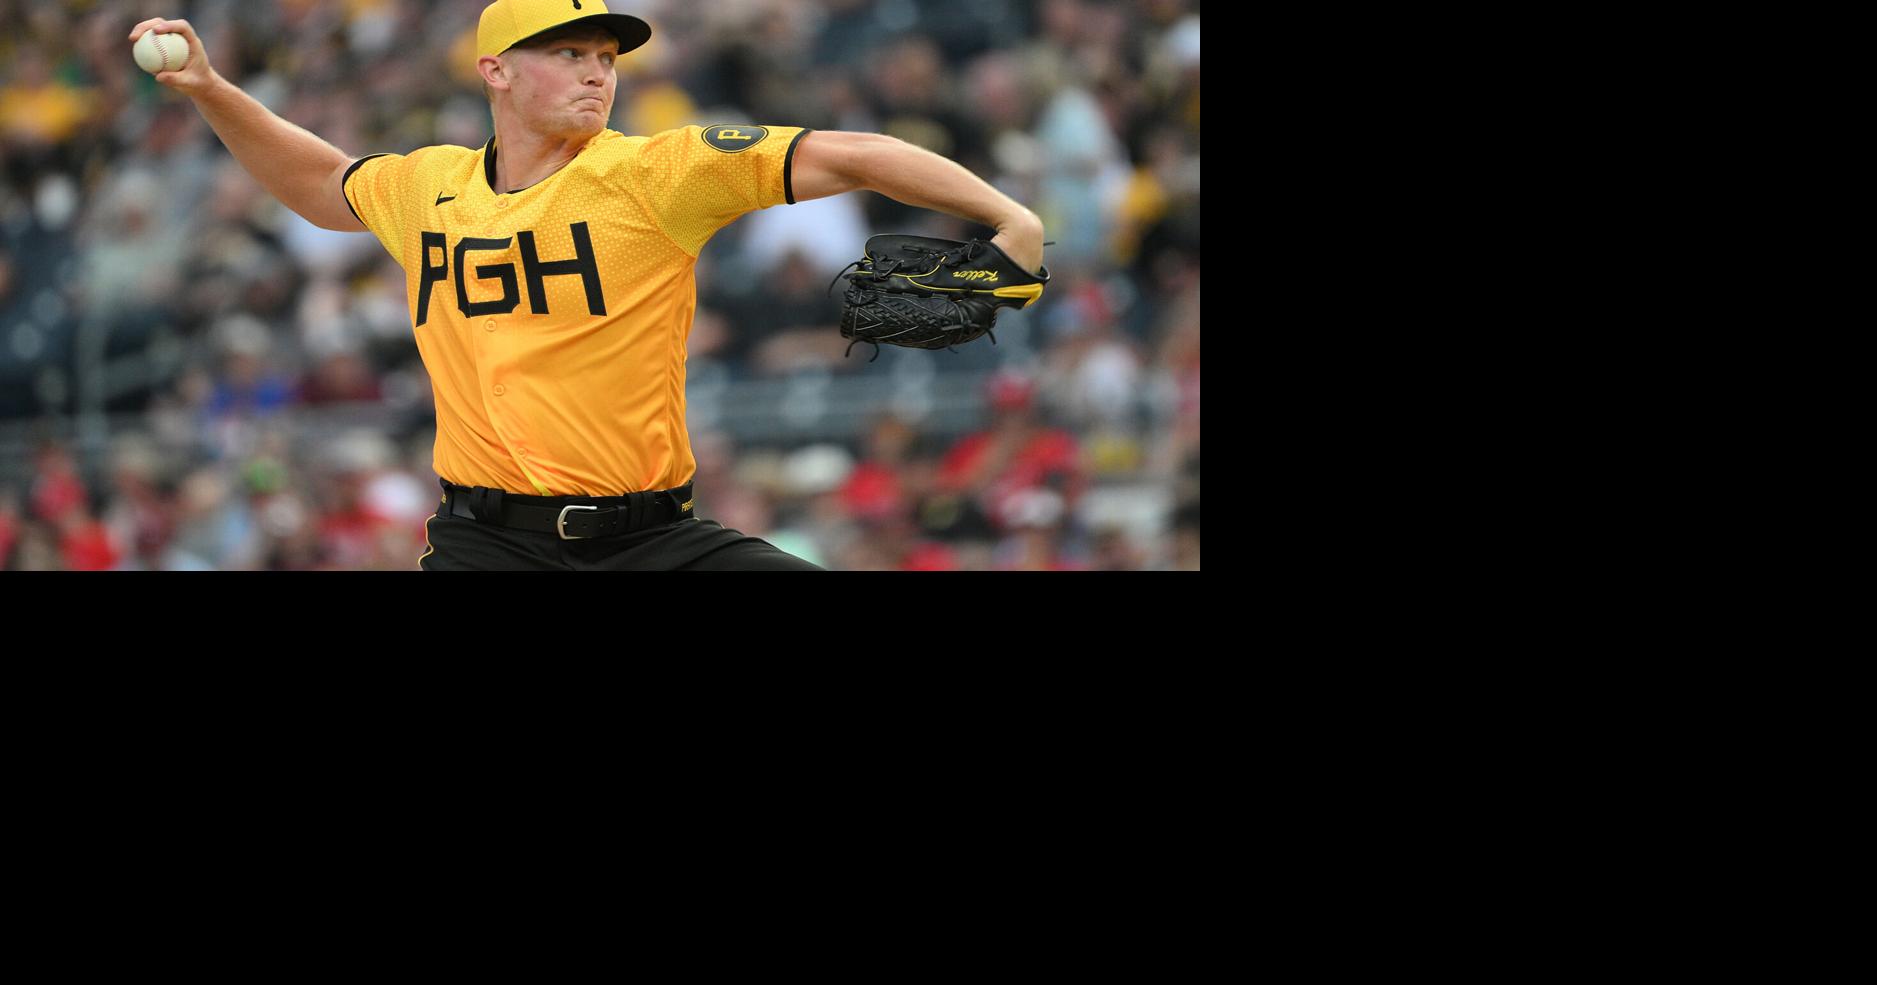 Mitch Keller reverts back to All-Star form, but Pirates' offense held quiet  in 2-1 loss to Phillies, National Sports